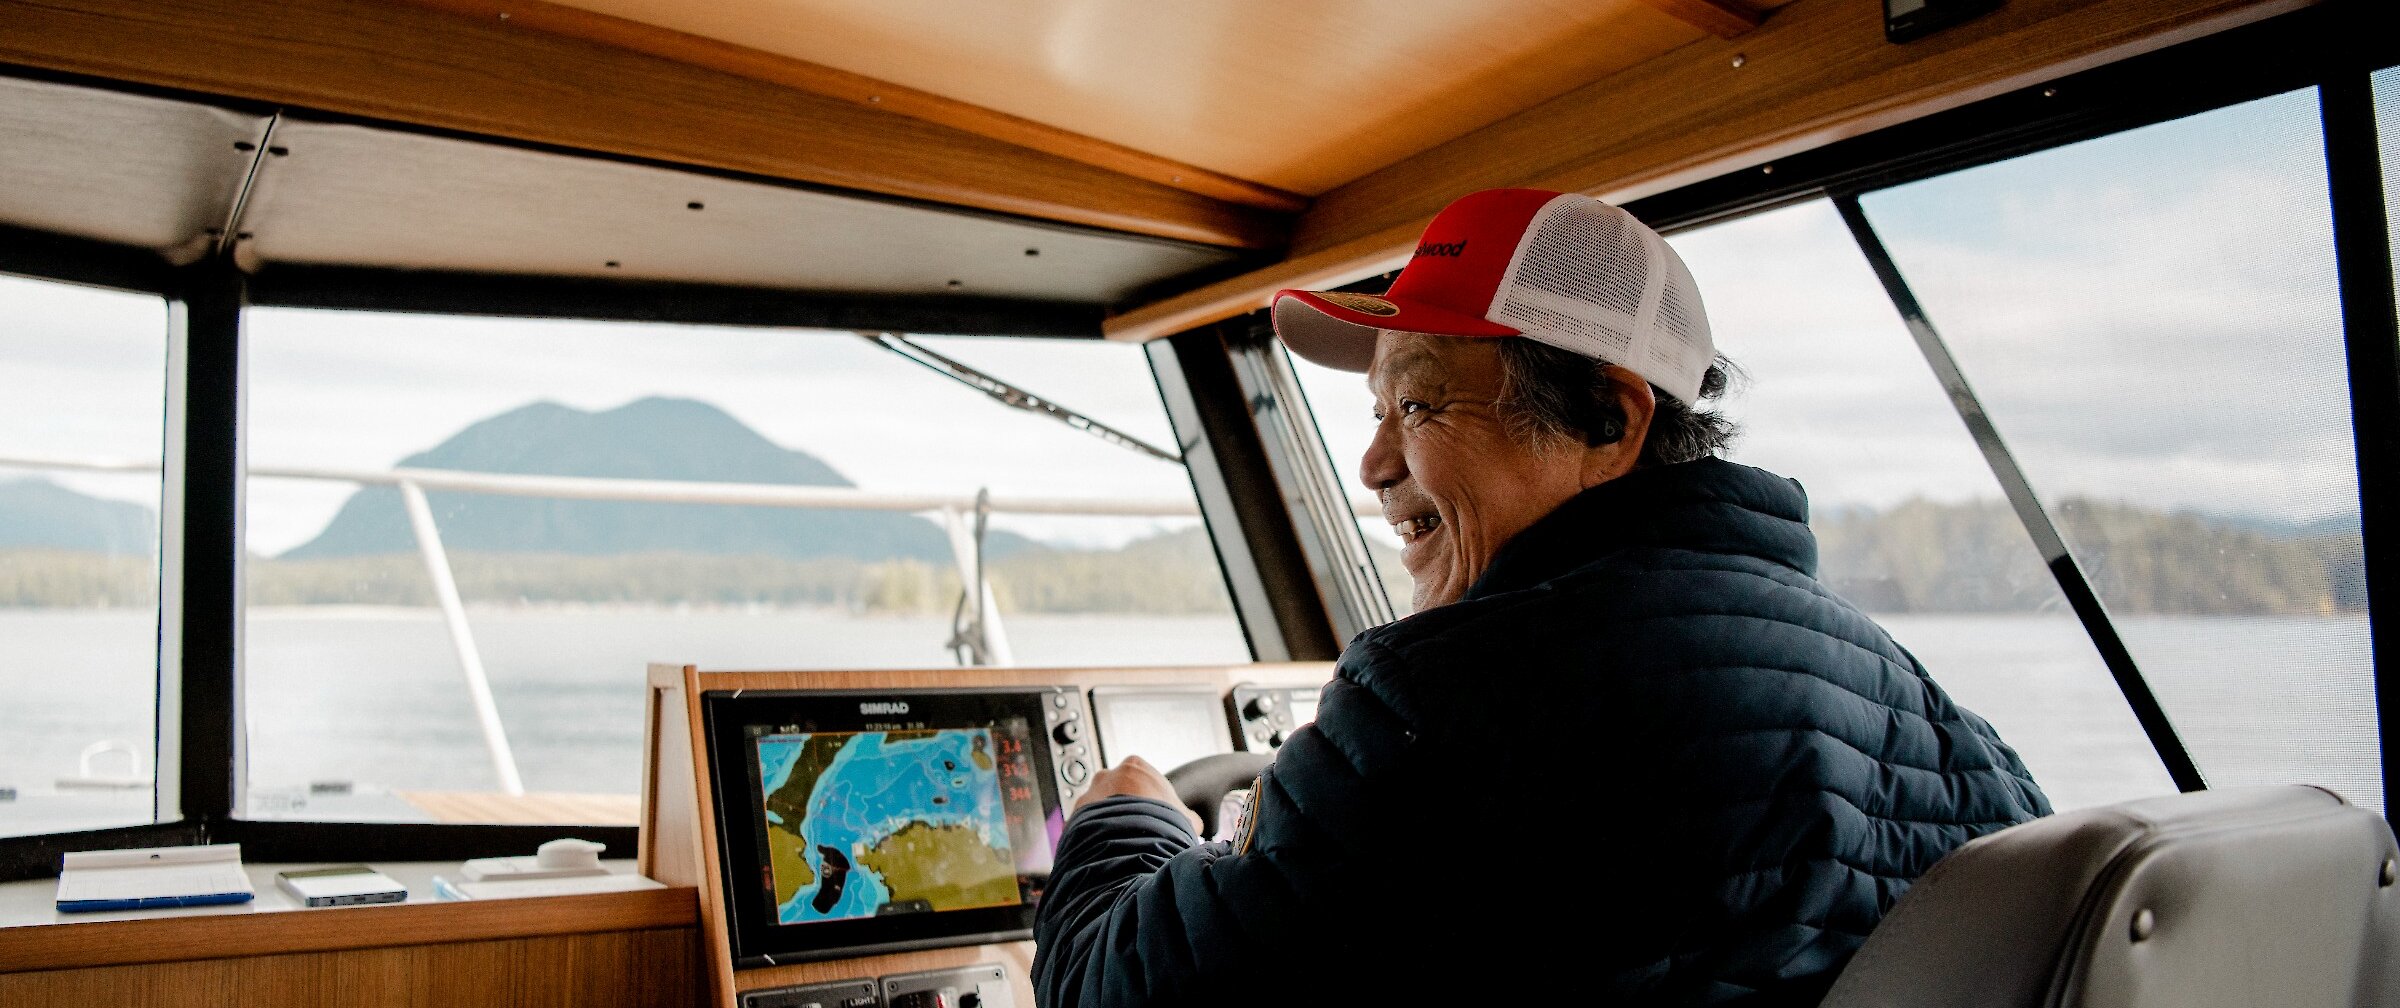 Man driving boat, smiling, with Meares Island visible in the distance.